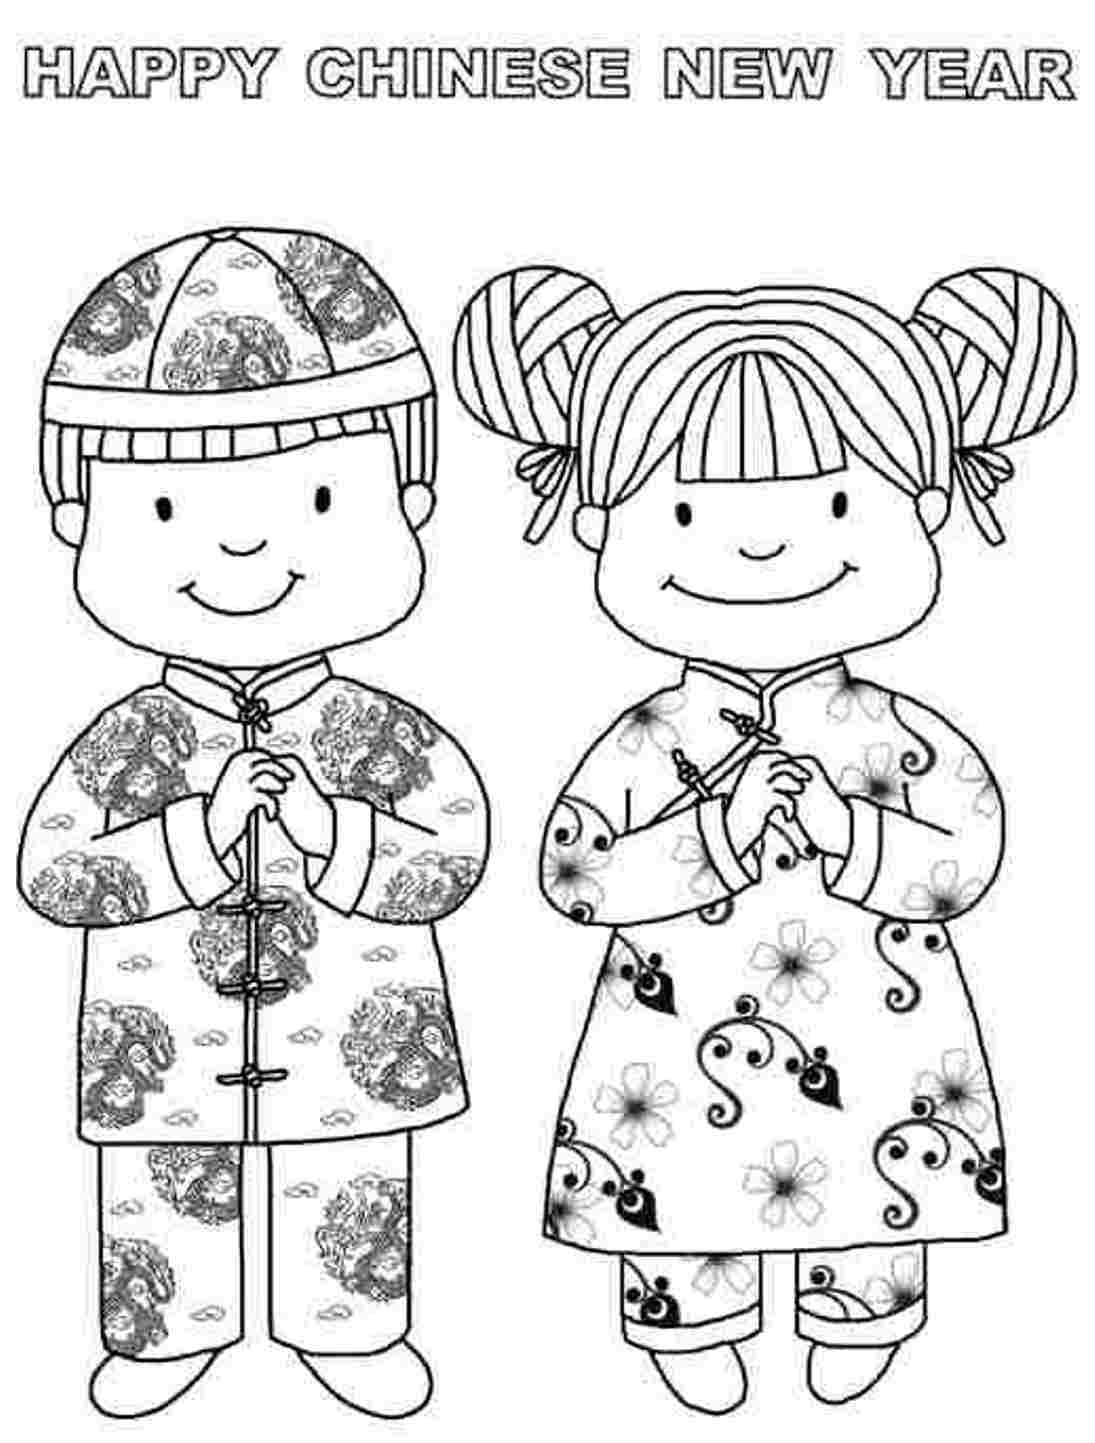 Download Chinese New Year Coloring Pages - Best Coloring Pages For Kids